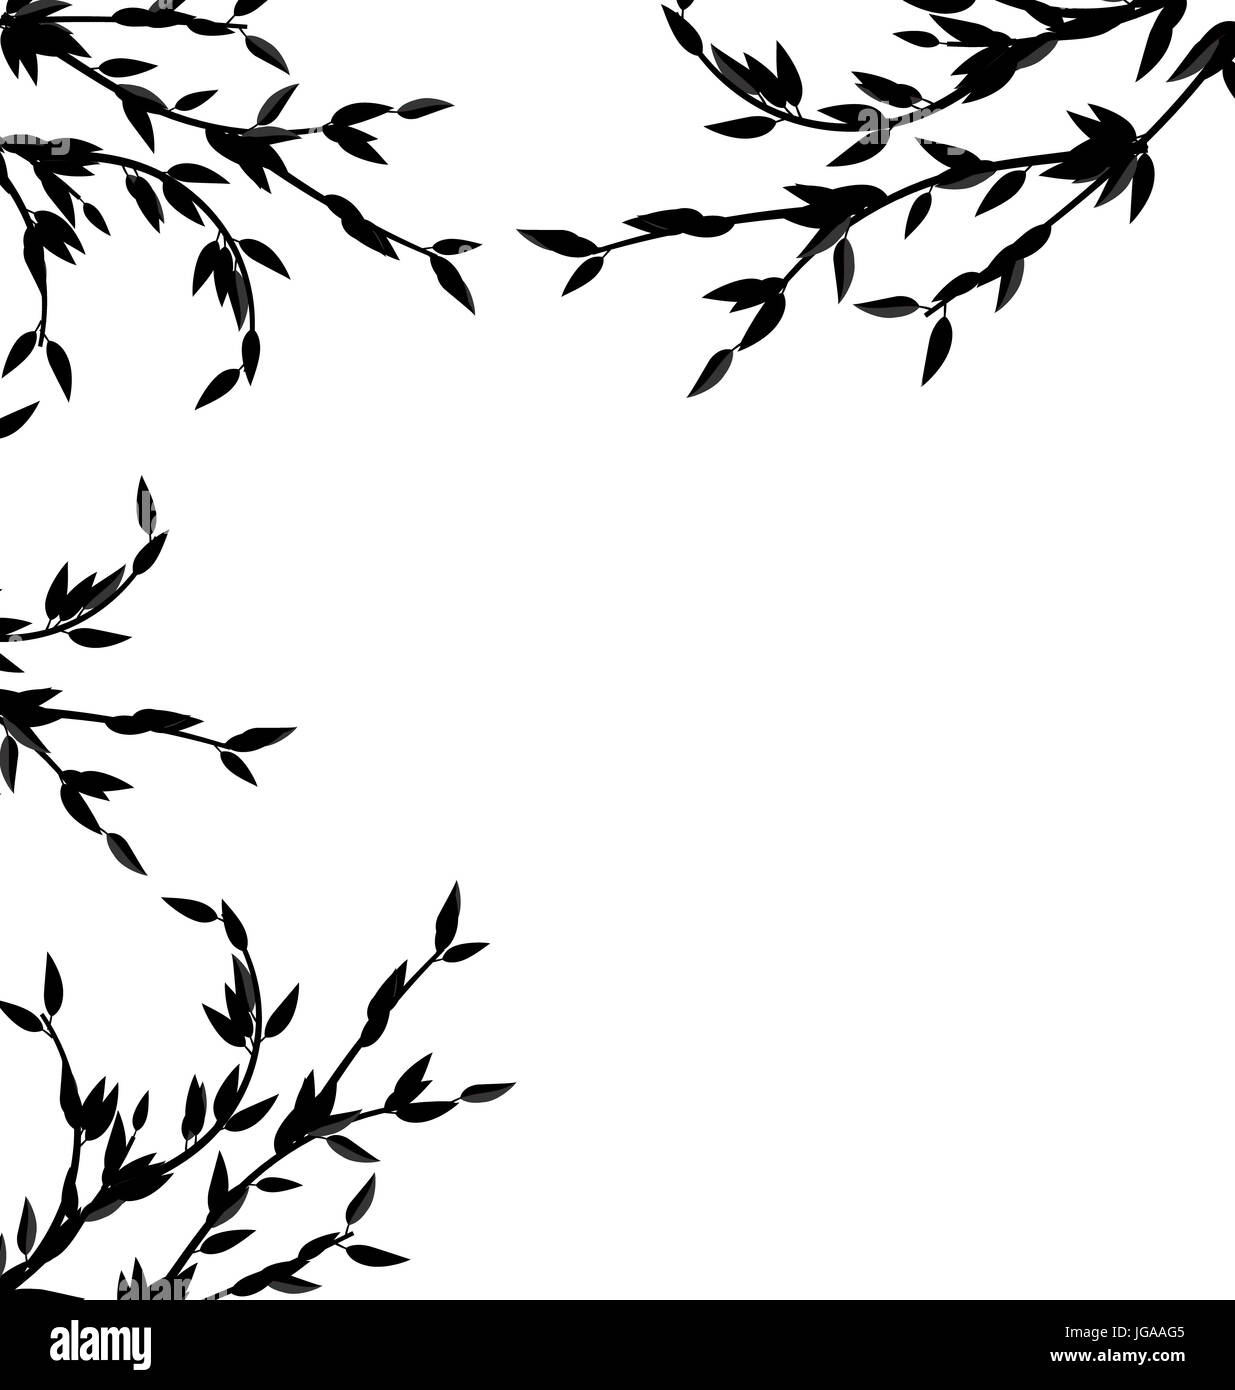 Illustration Black Silhouette Branch Tree with Leafs Frame for Design ...